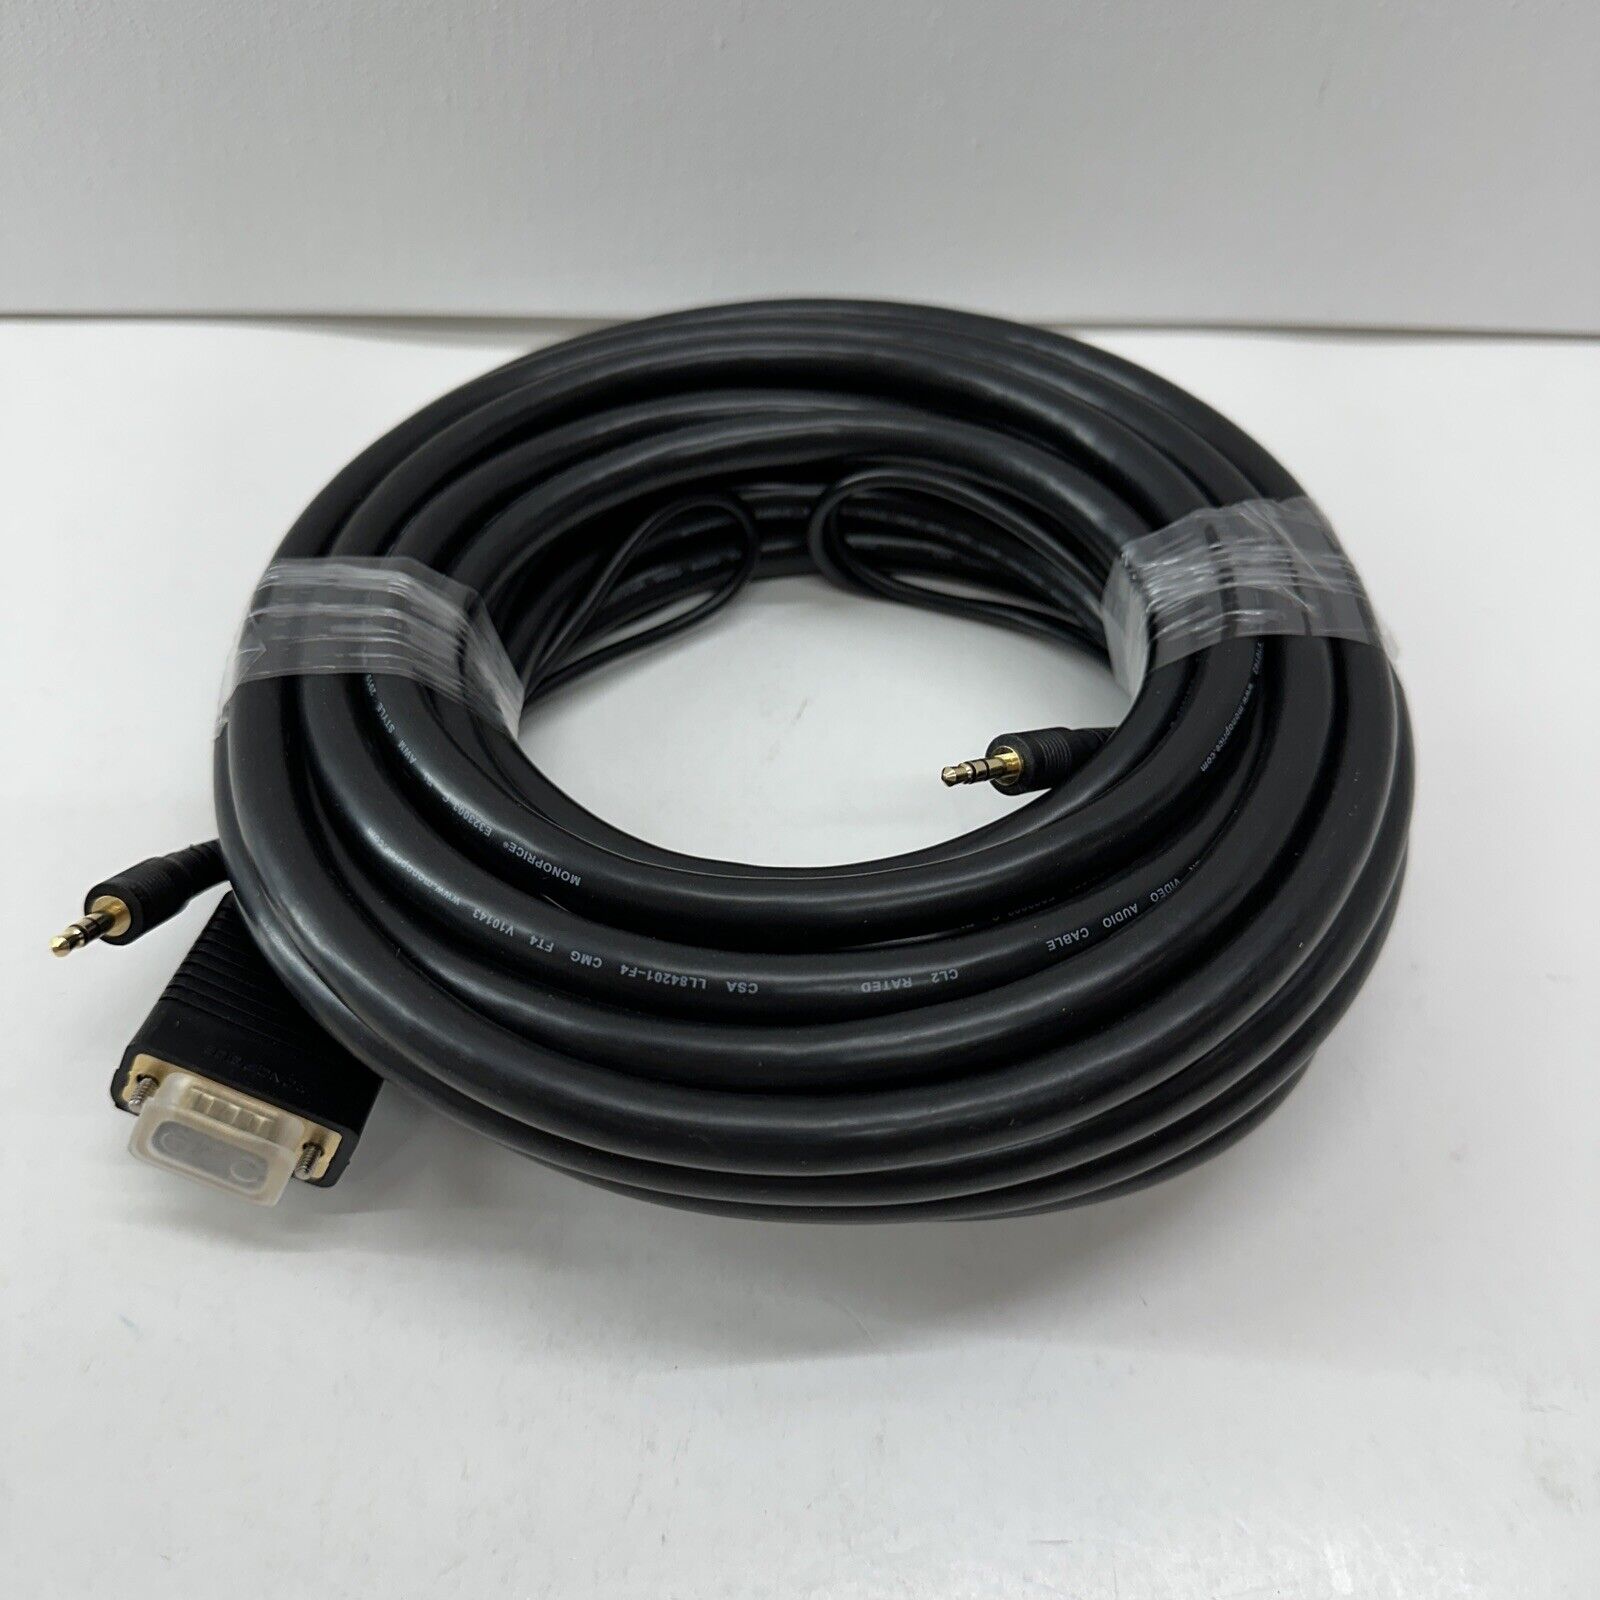 Monoprice Super VGA Cable - 25 Feet - HD15 Male/Male with Stereo Audio and Tripl